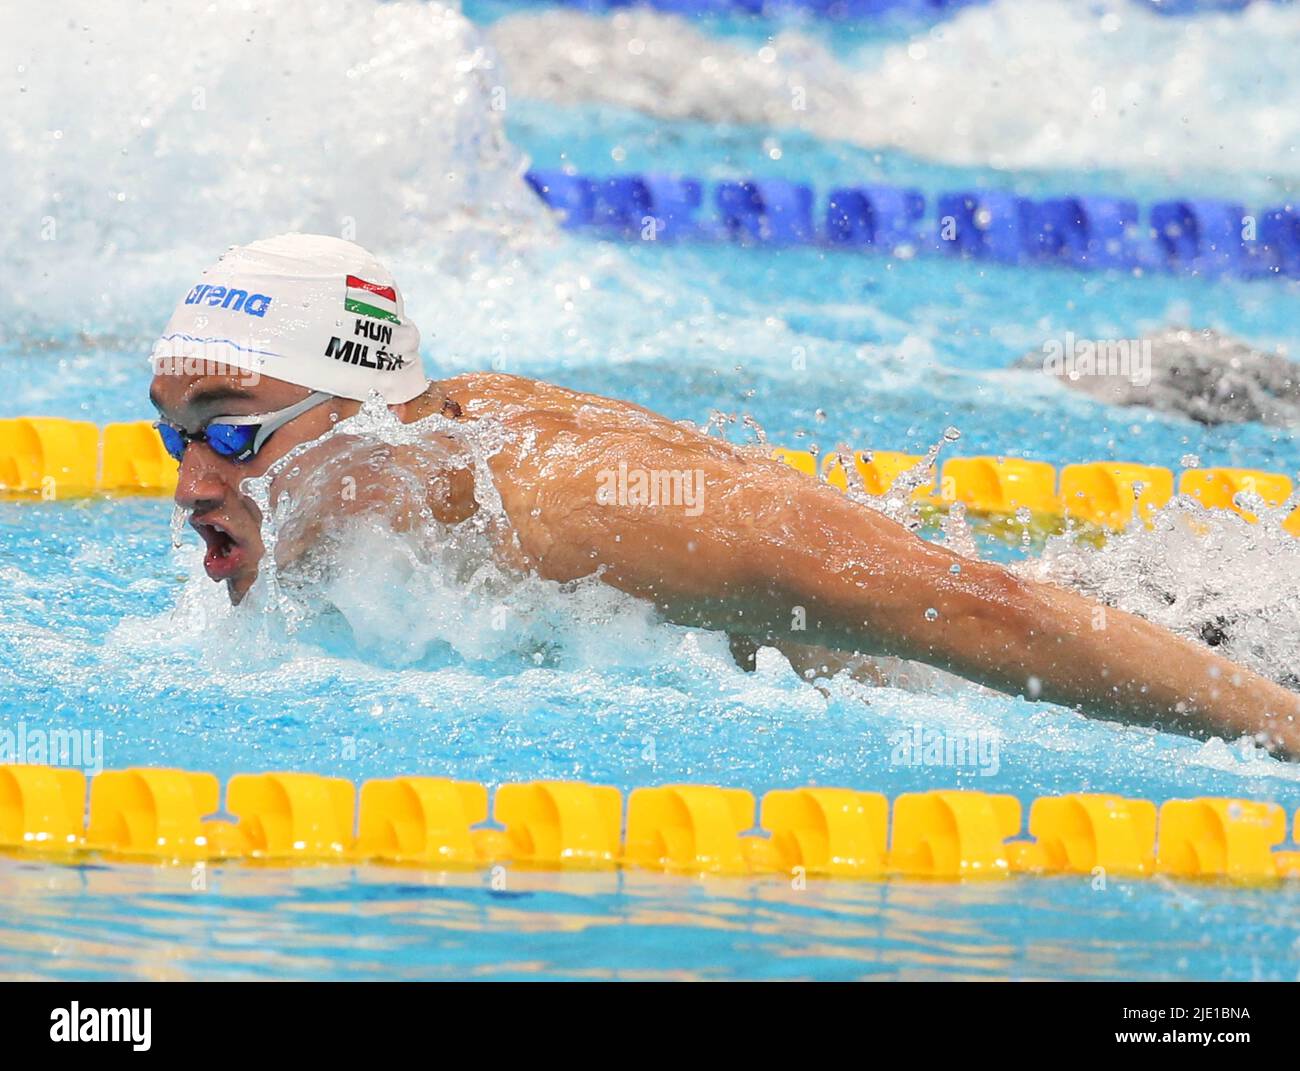 Budapest, Hungary. June 23 2022, Kristof Milak of Hongrie 1/2 Final 100 M Butterfly Men during the 19th FINA World Championships Budapest 2022, Swimming event on June 23 2022 in Budapest, Hungary. Photo by Laurent Lairys/ABACAPRESS.COM Stock Photo